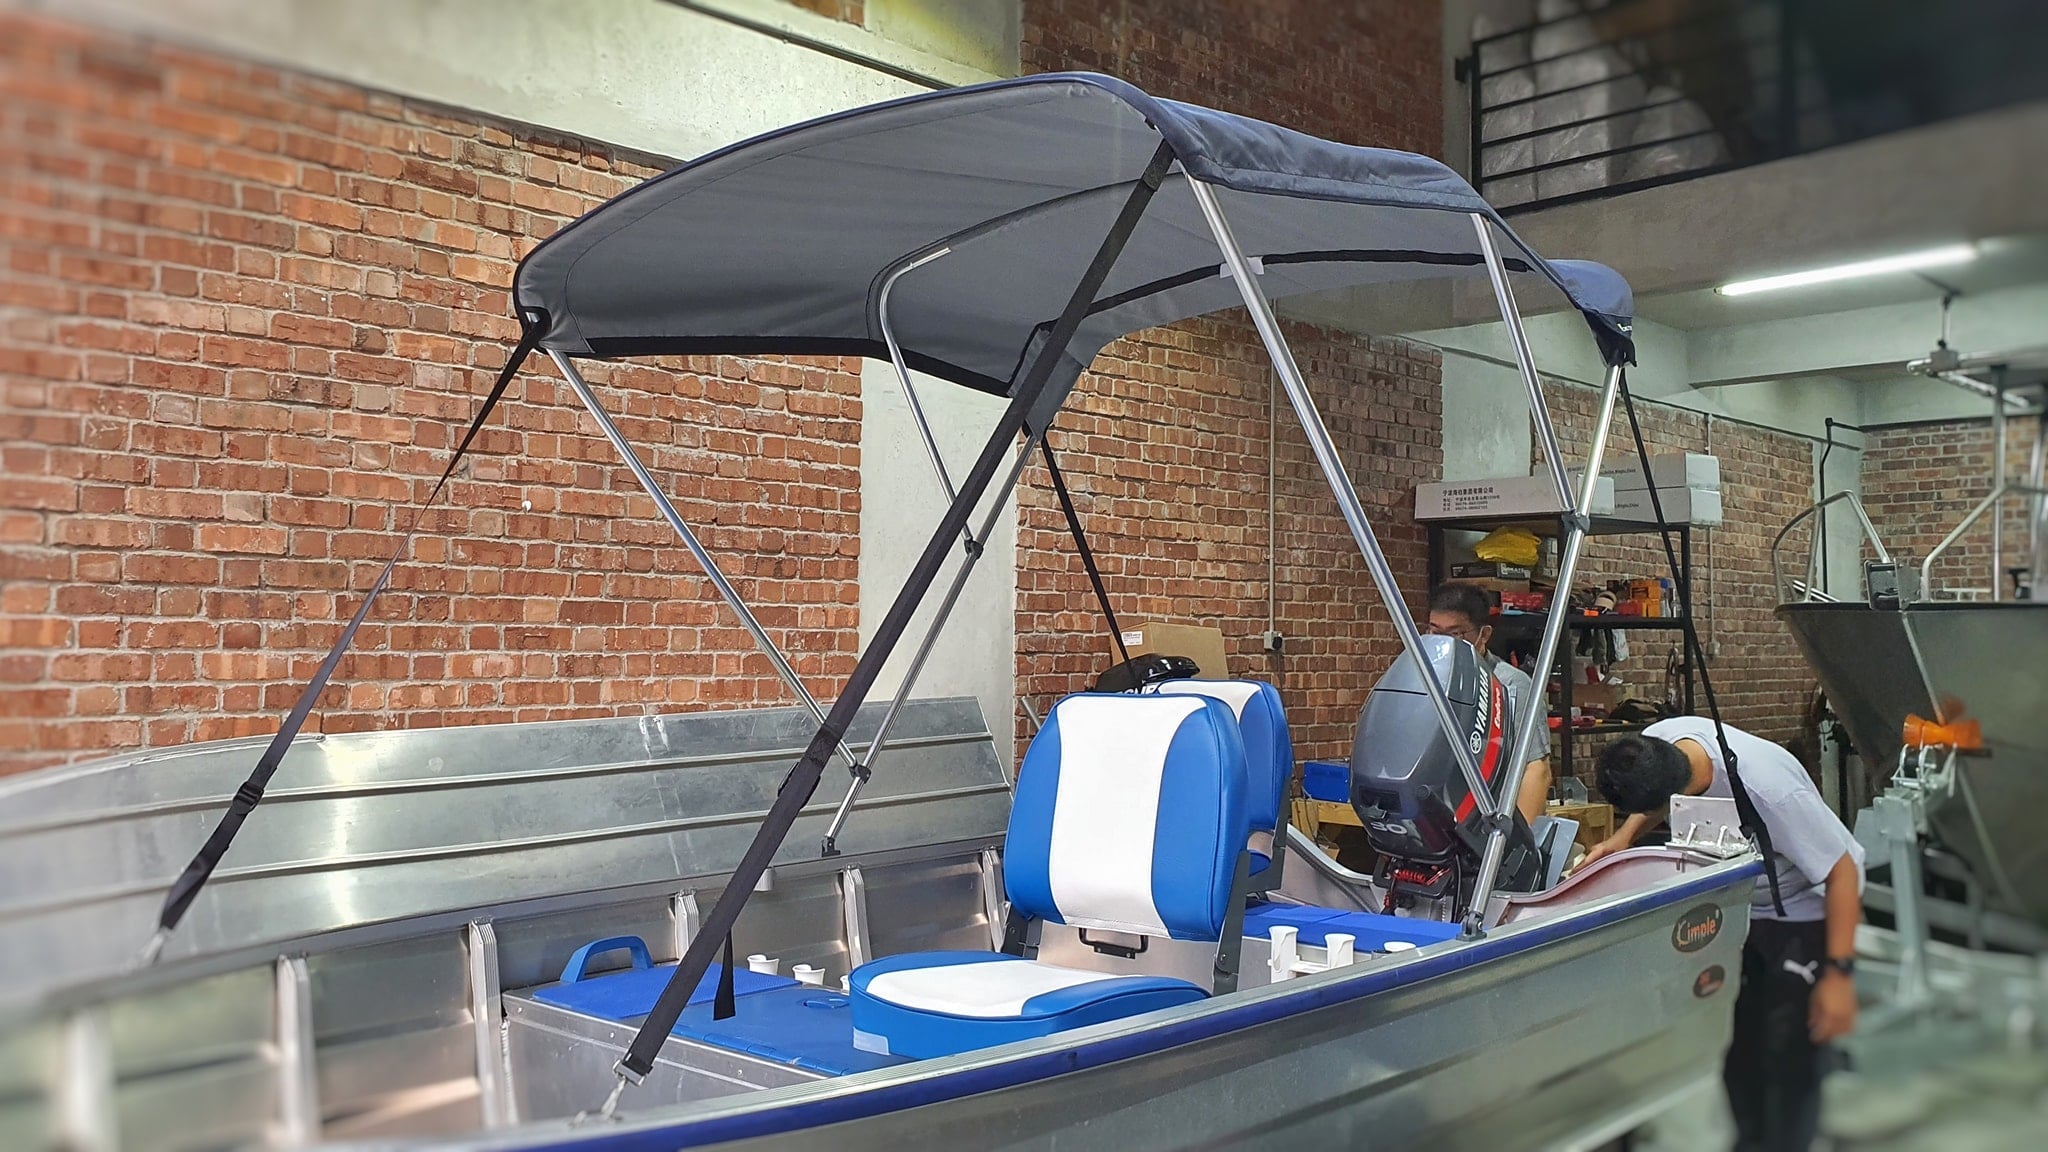 Boat Awning and Bimini Top – Ken and Tan Sdn Bhd Boat Manufacturer